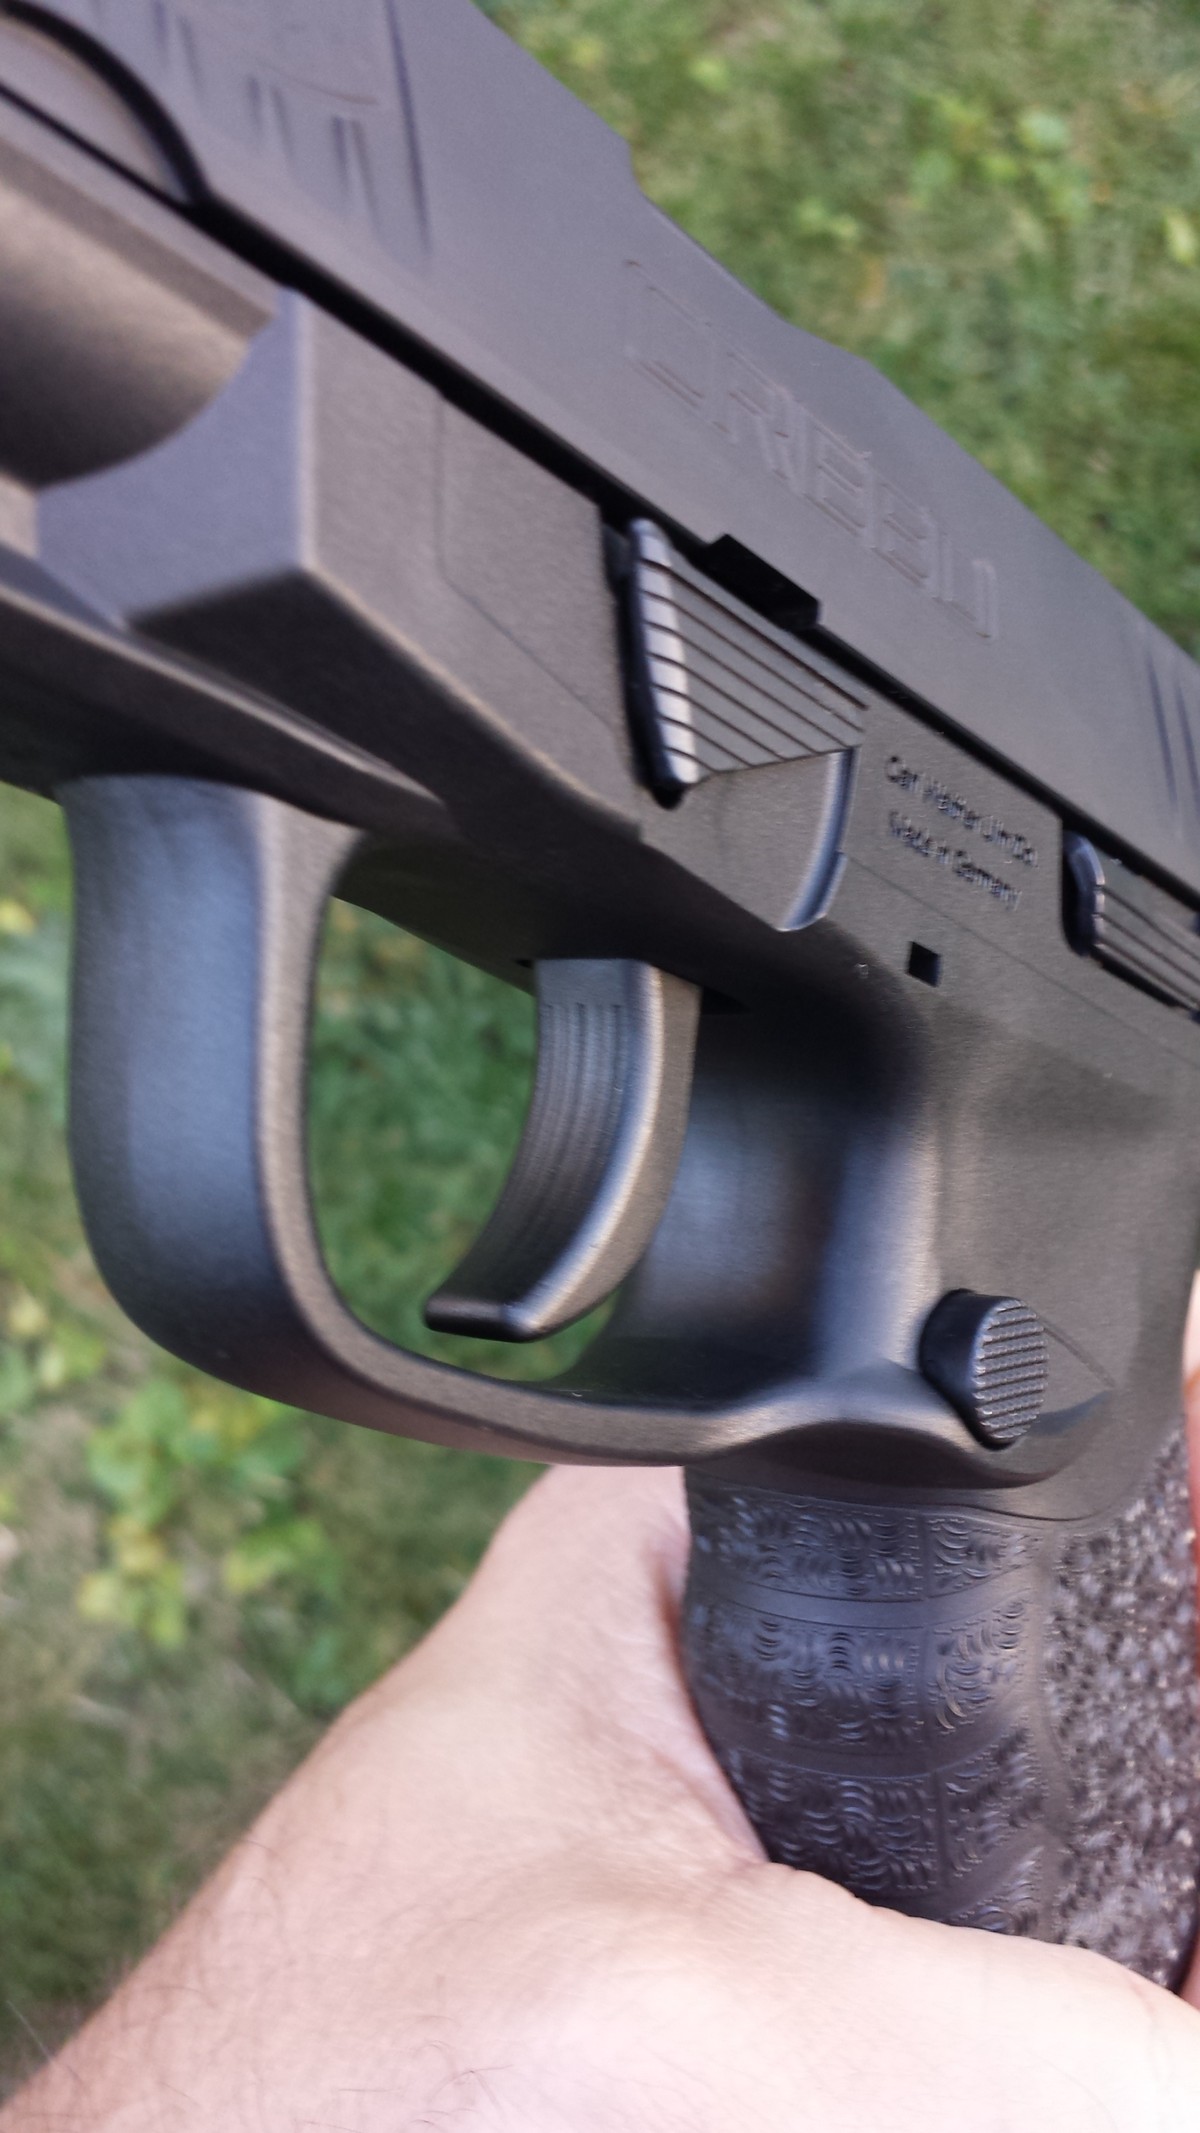 [FIREARM REVIEW] Walther Creed Review Concealed Nation